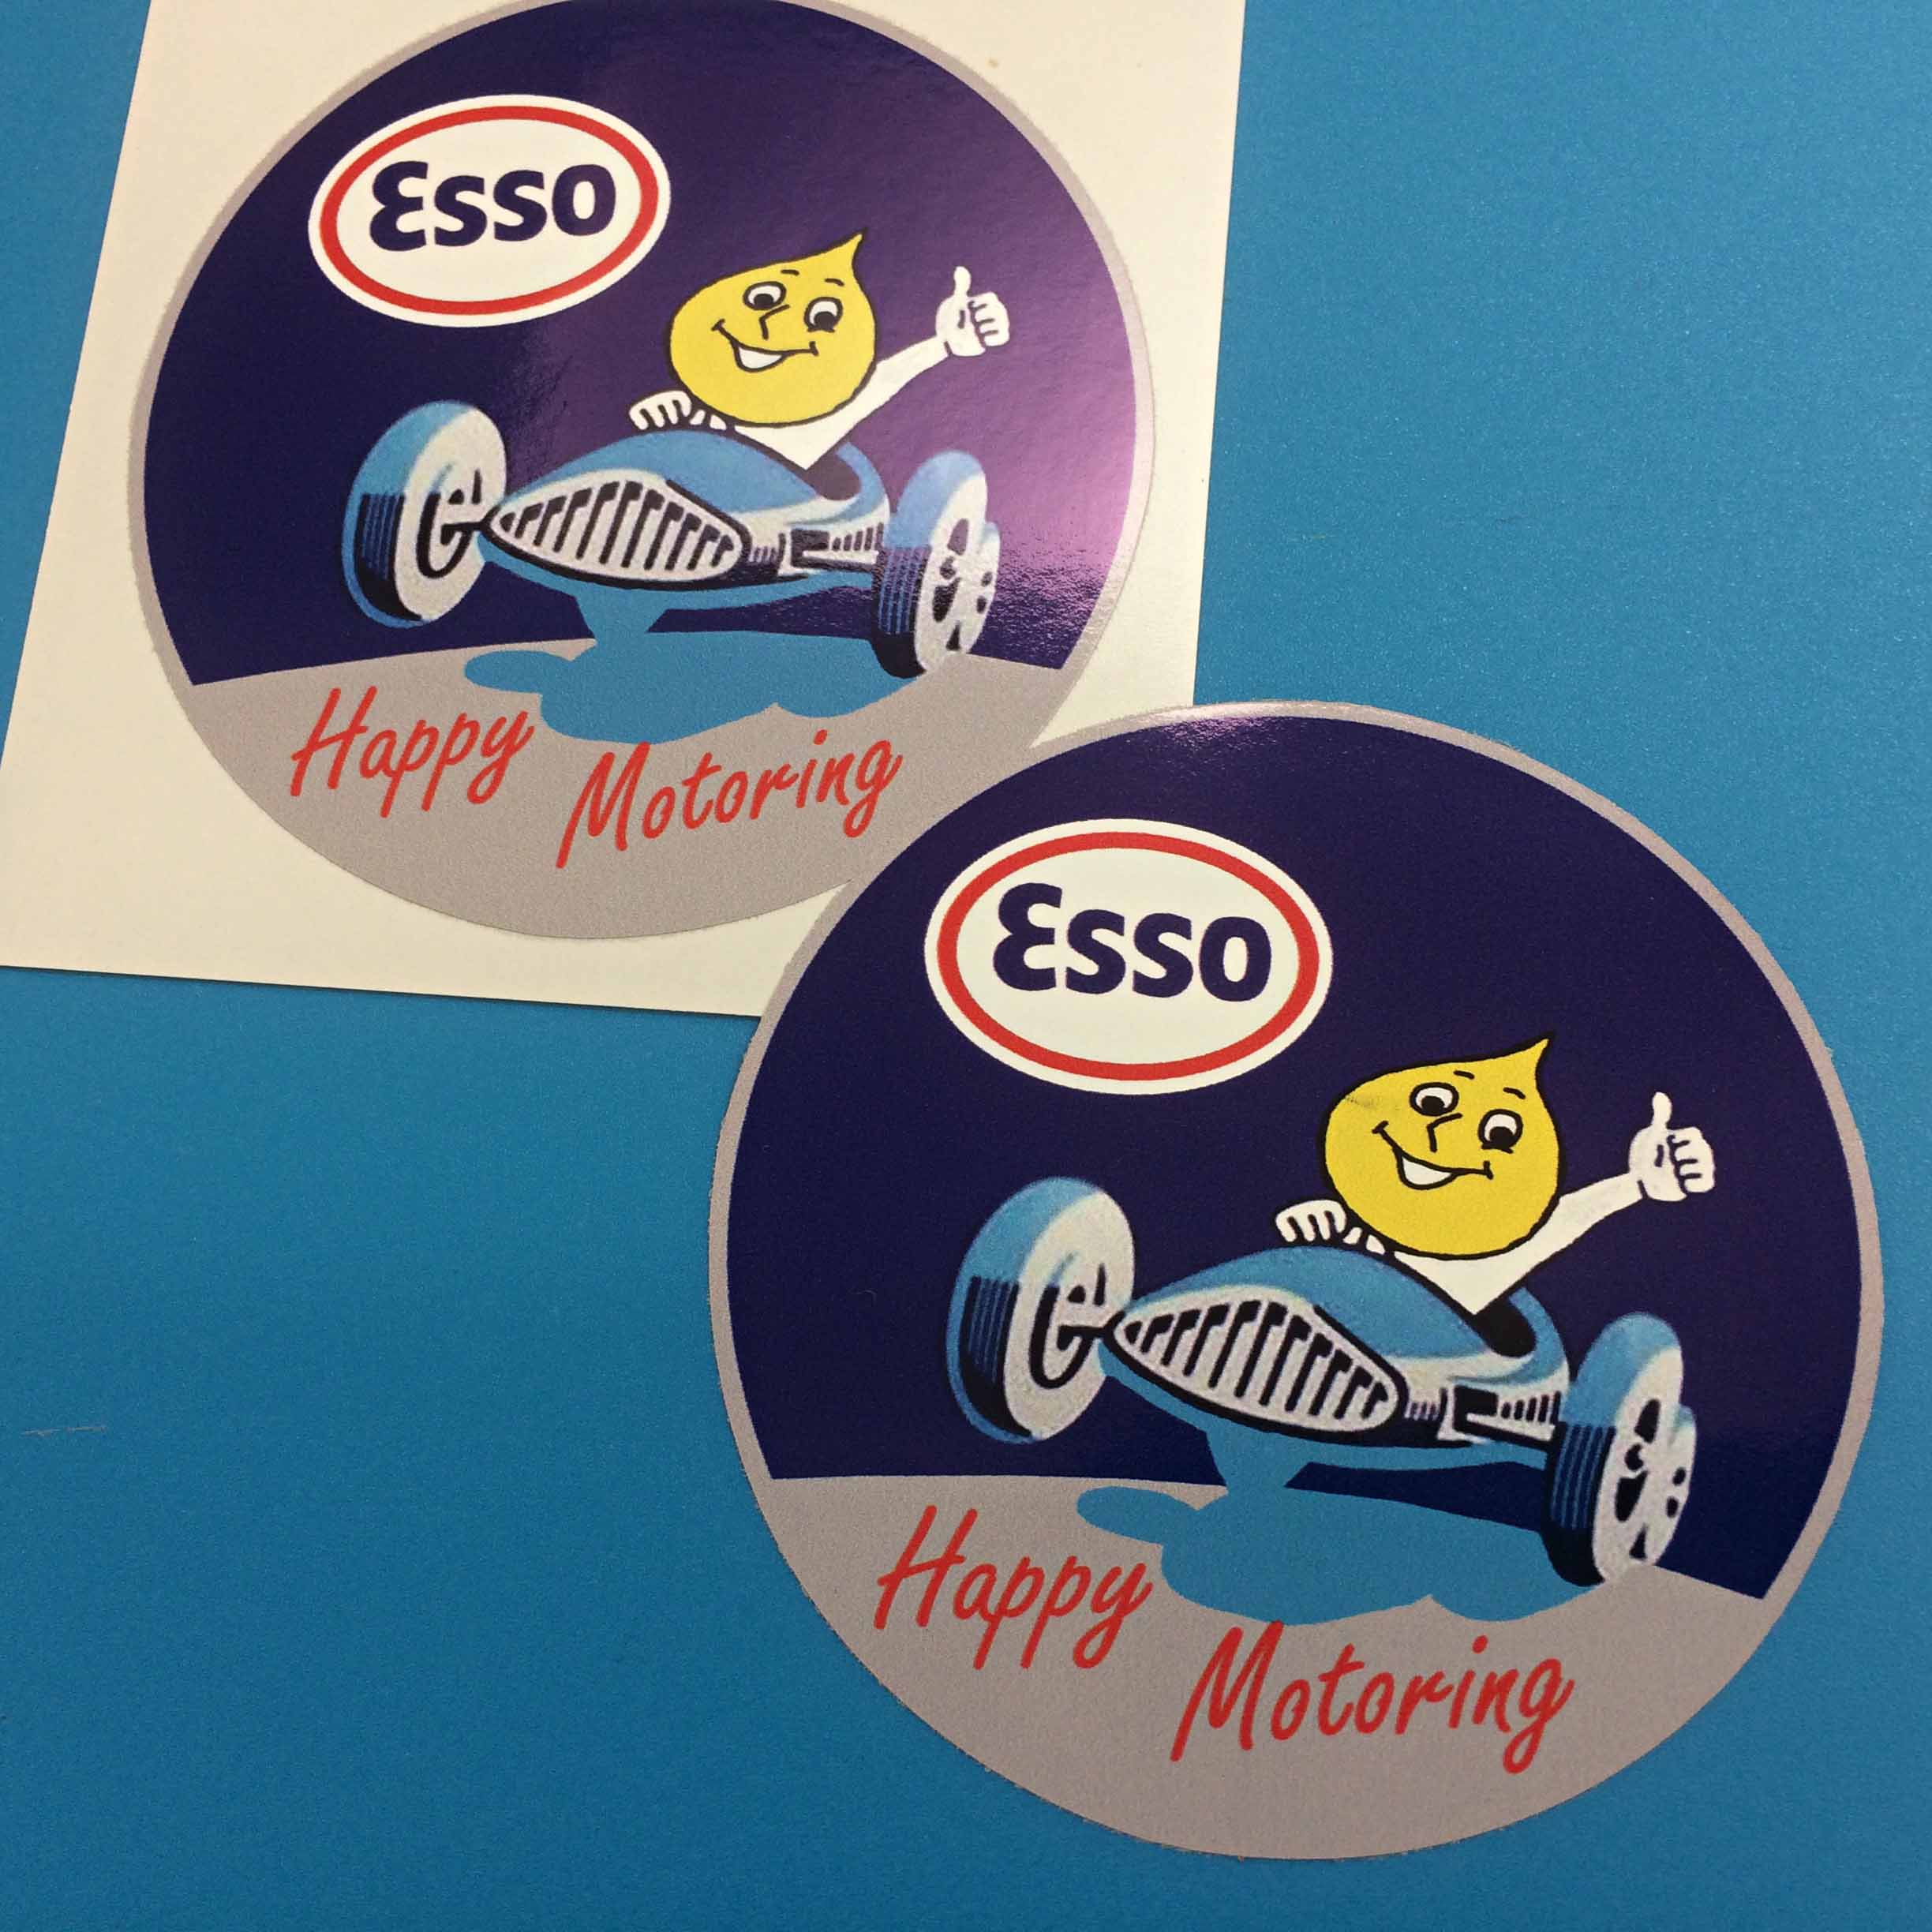 The Esso Oil Drop Man driving a blue sports car while giving the thumbs up. The Esso logo and Happy Motoring in red lettering is above and below.